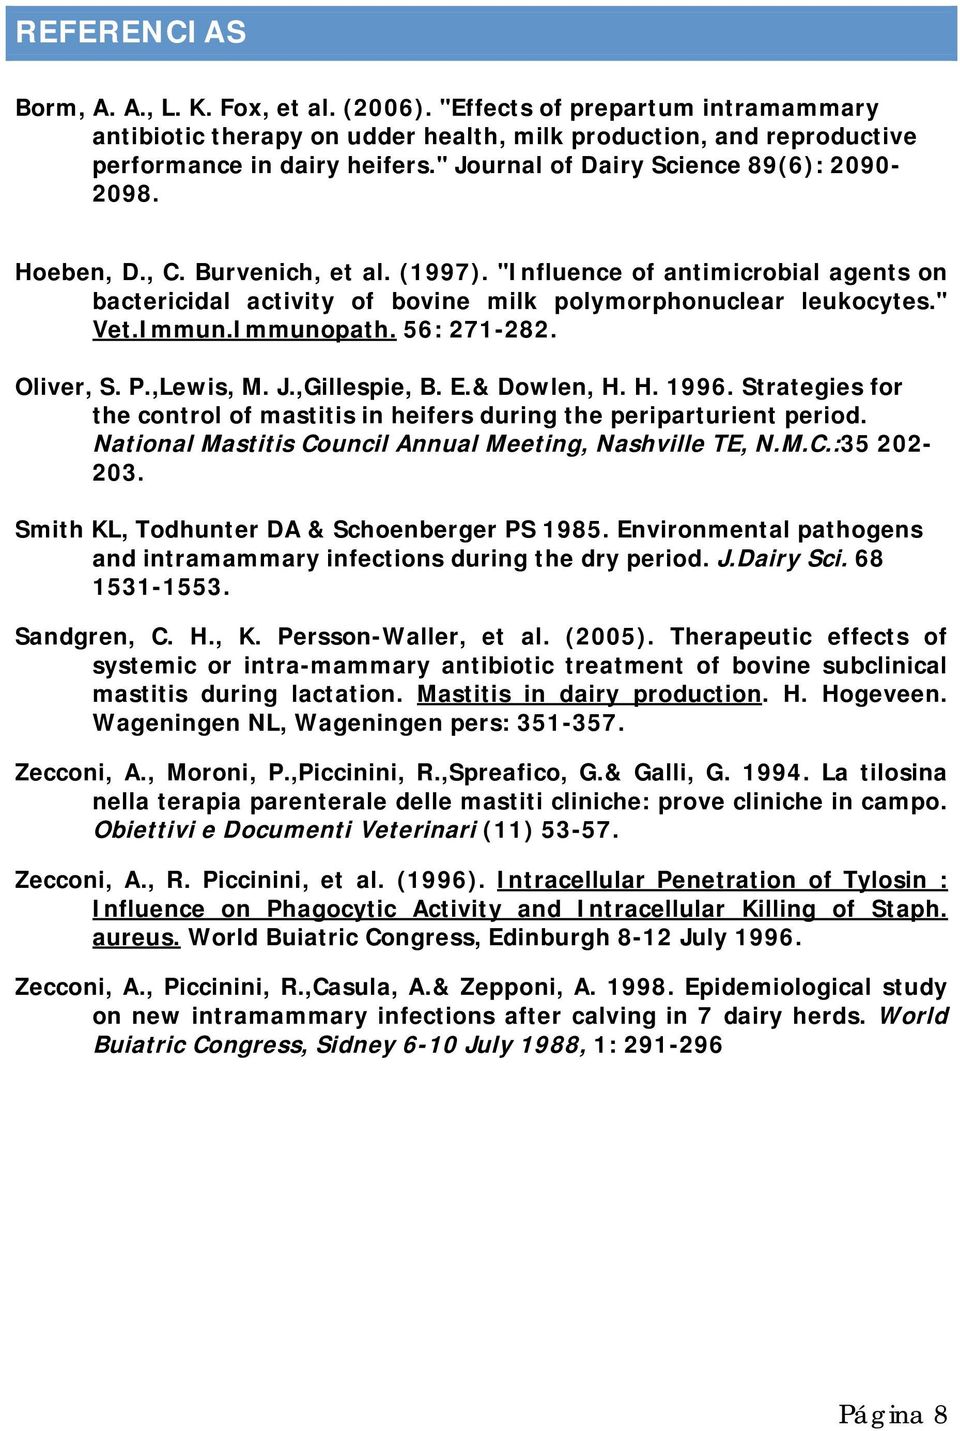 Immun.Immunopath. 56: 271-282. Oliver, S. P.,Lewis, M. J.,Gillespie, B. E.& Dowlen, H. H. 1996. Strategies for the control of mastitis in heifers during the periparturient period.